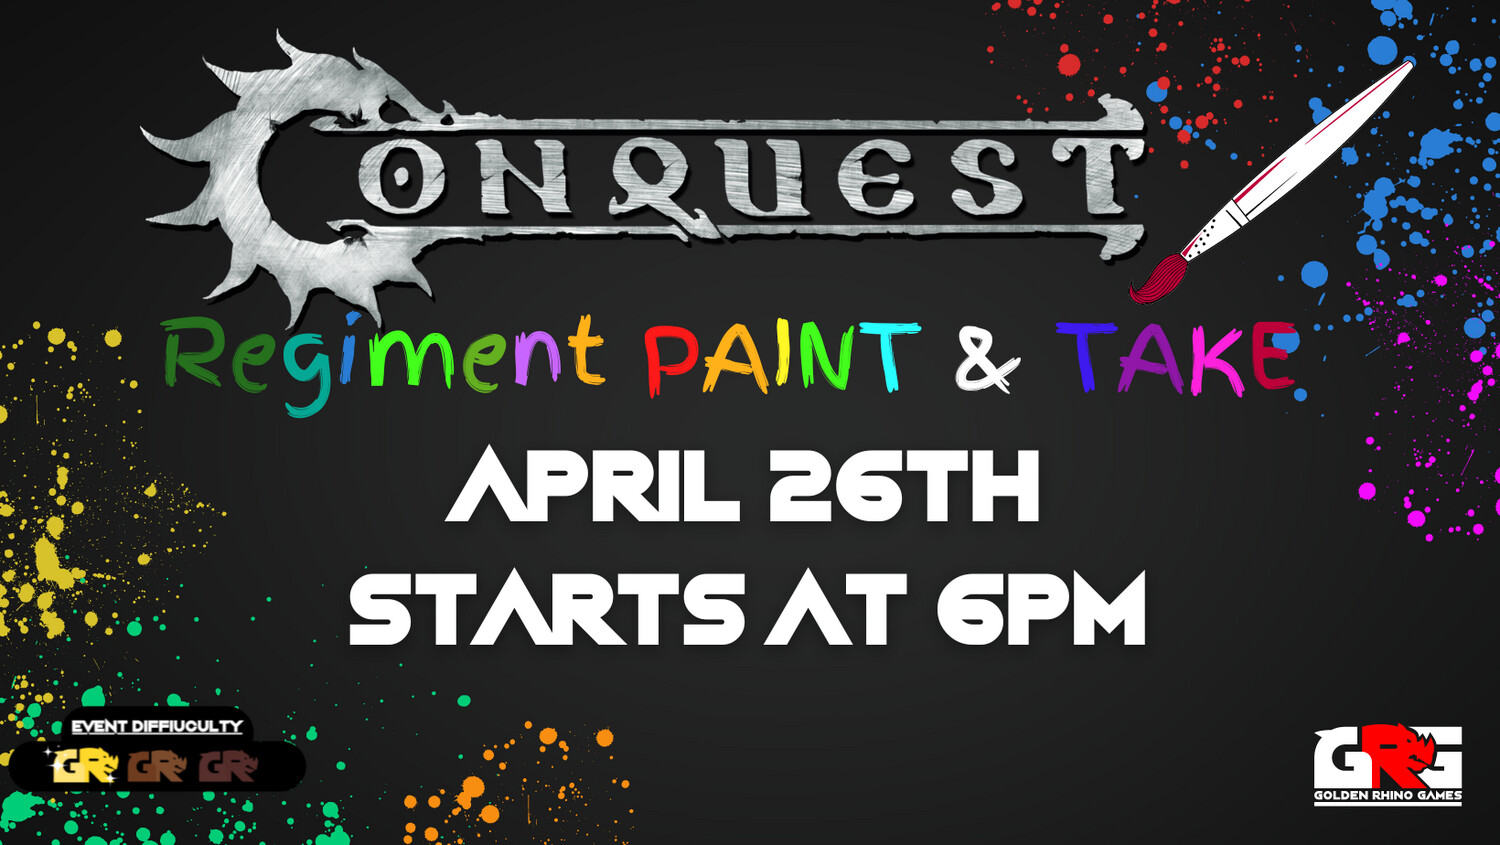 04/26 Conquest: Regiment Paint and Take!